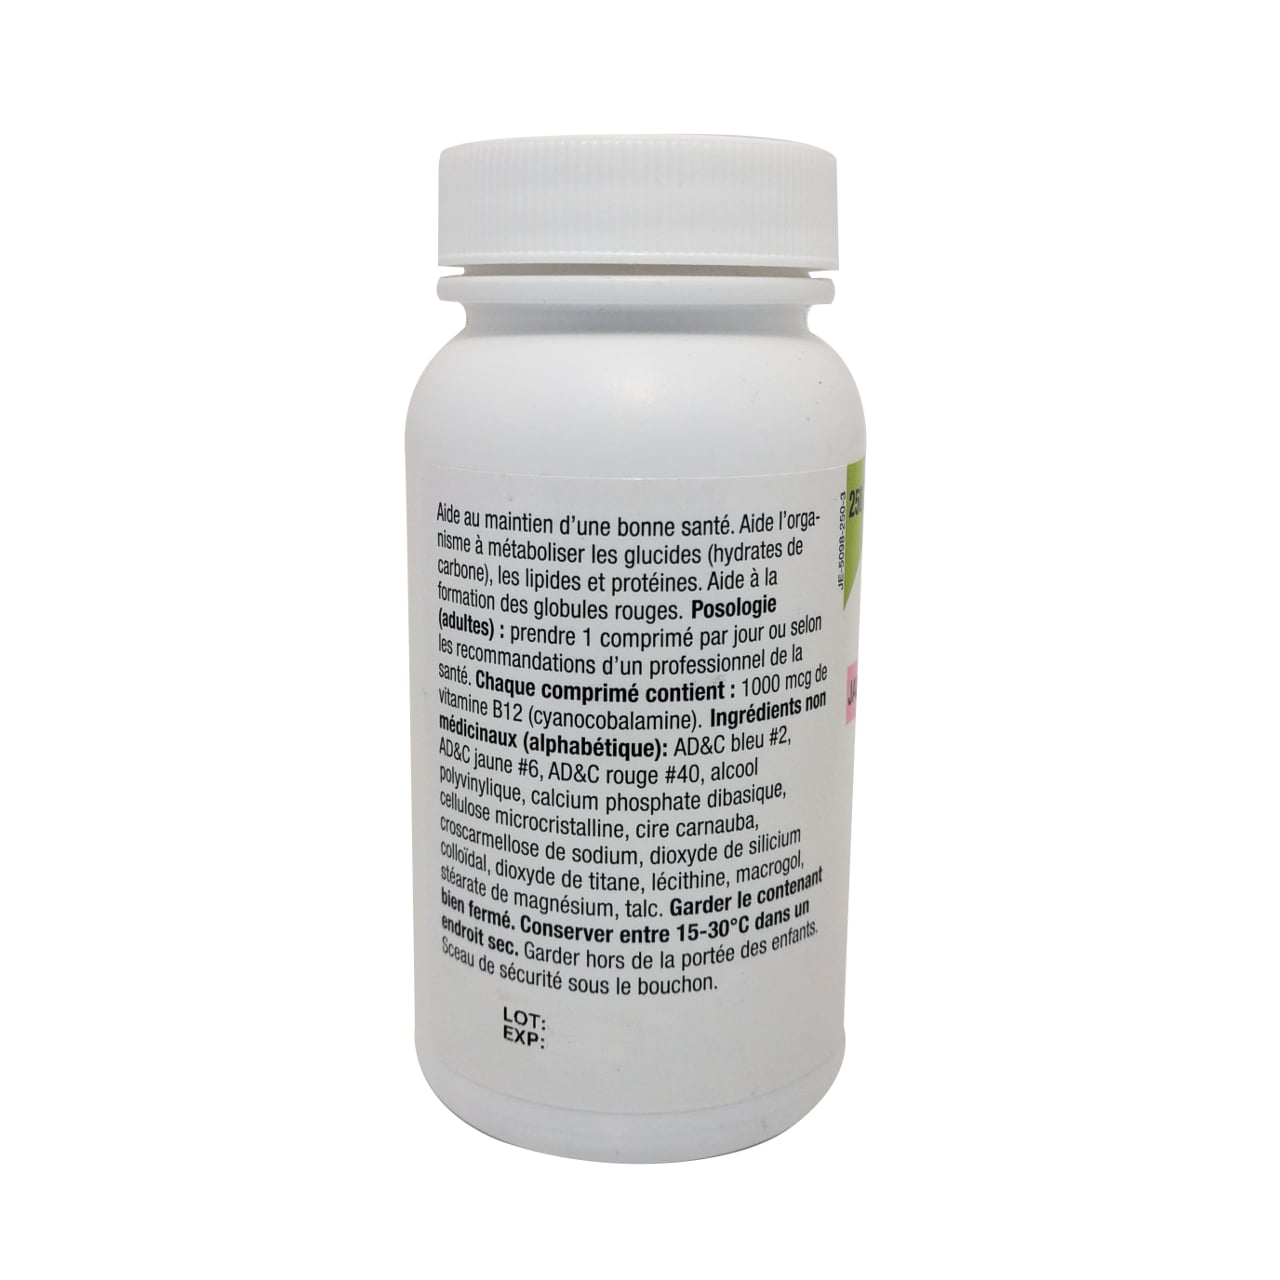 Product details, ingredients, and dosage for JAMP Vitamin B12 1000mcg in French